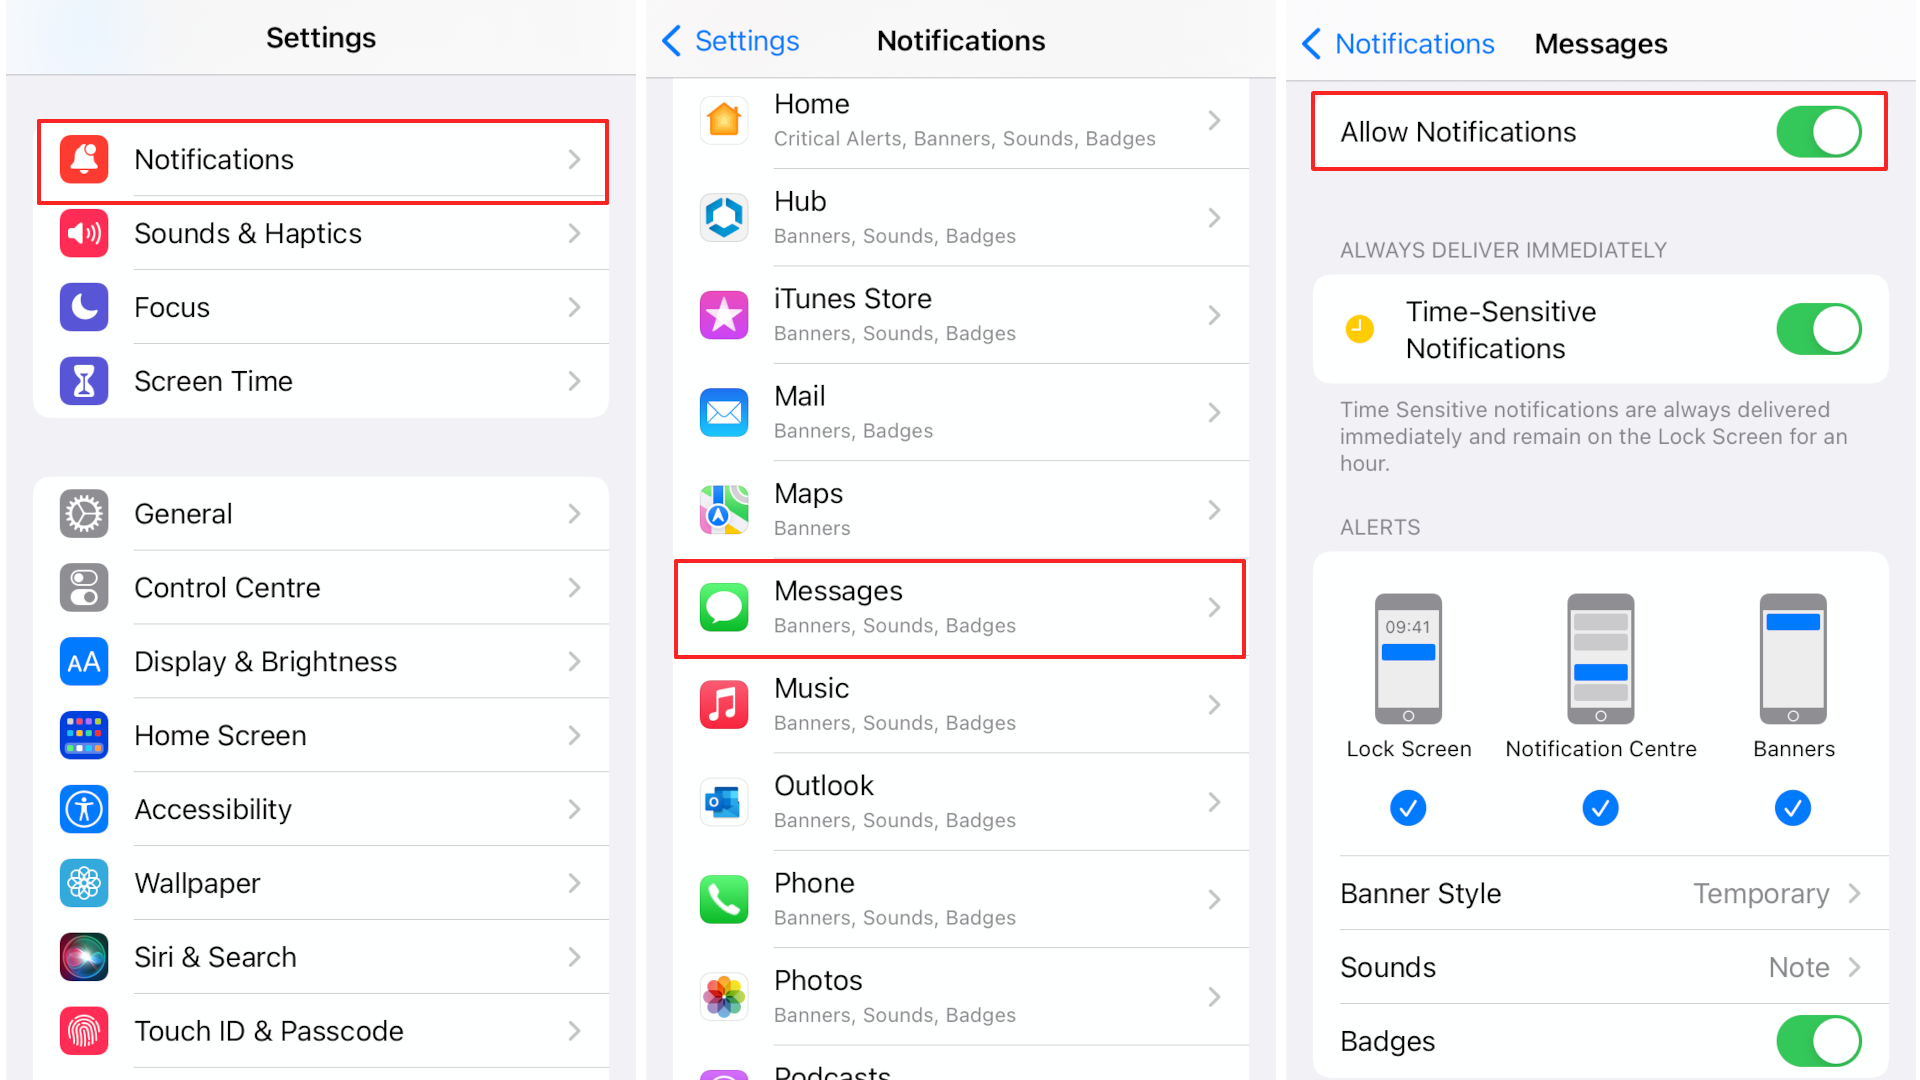 App settings for notifications on Apple device